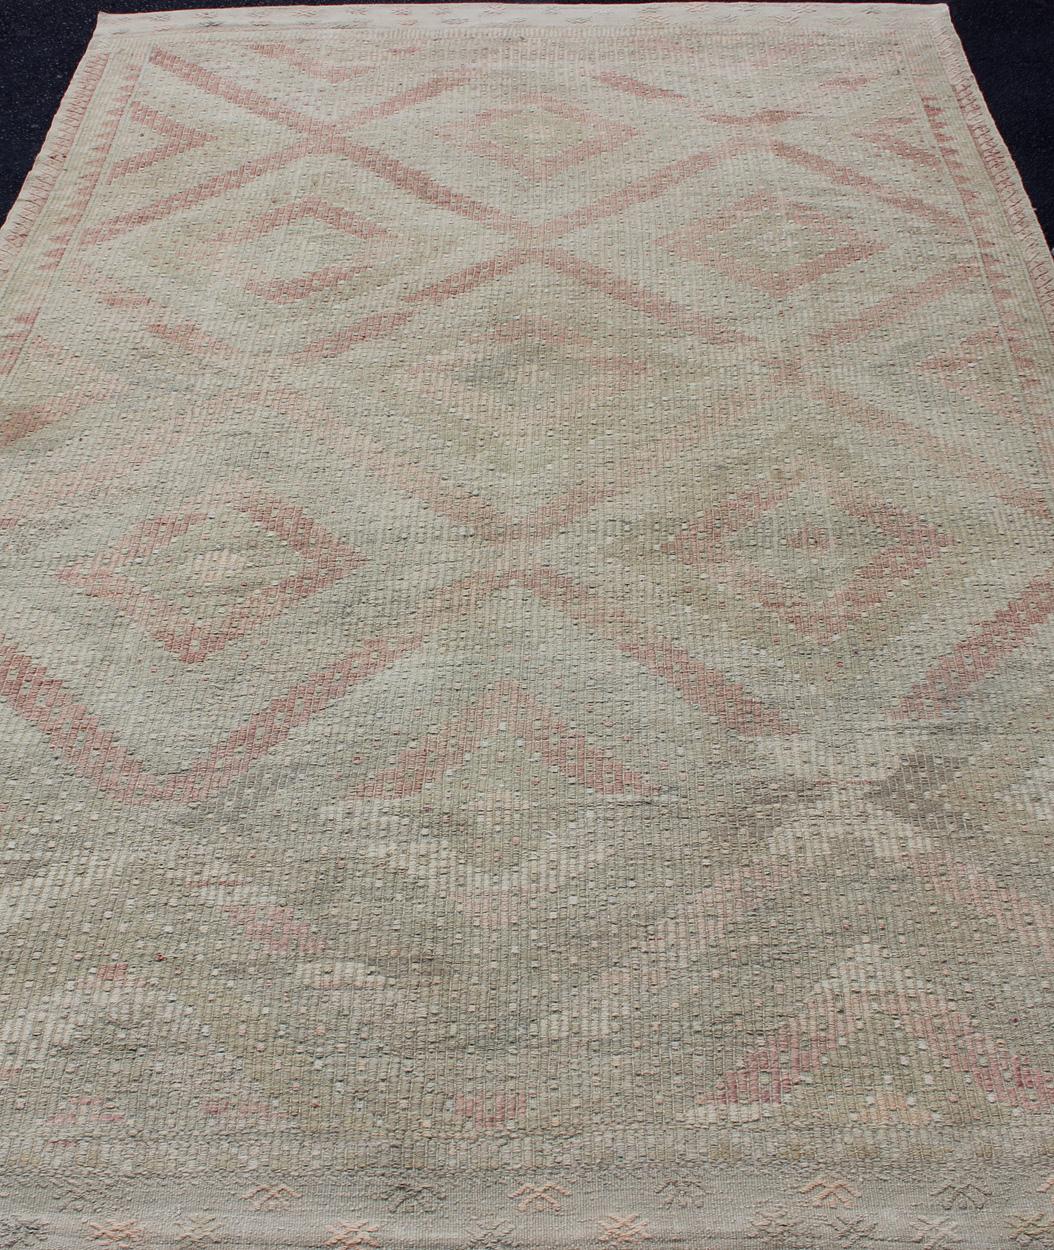 Vintage Turkish Embroidered Rug with Geometric Diamond Design with Soft Colors In Good Condition For Sale In Atlanta, GA